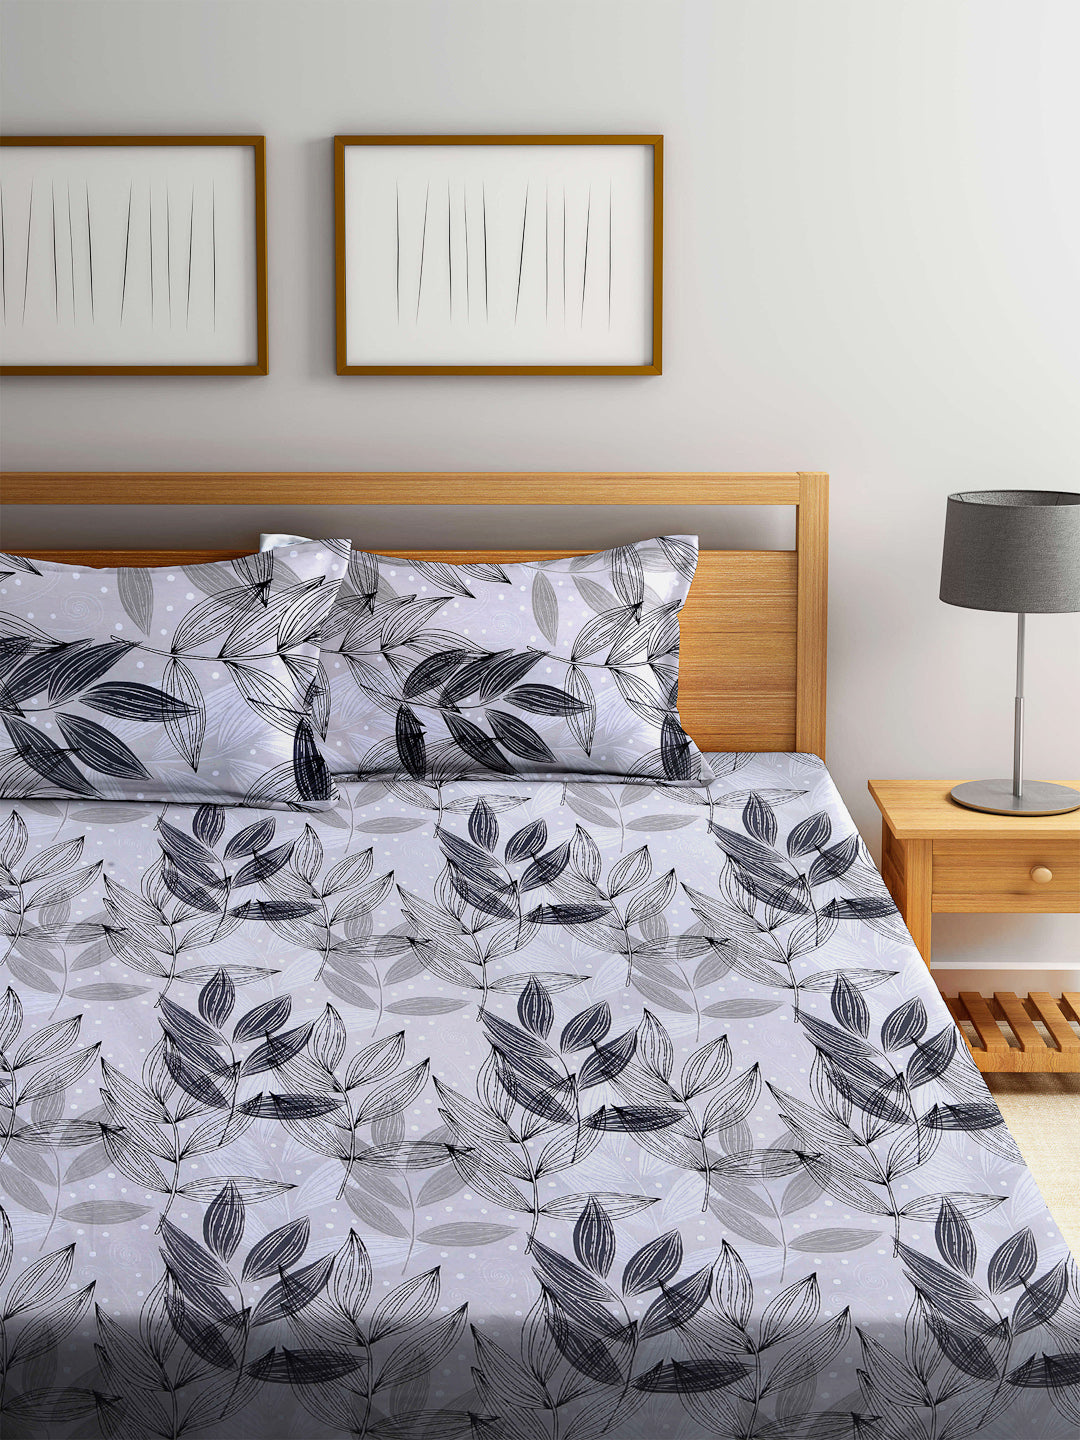 Arrabi Grey Leaf 100% Cotton King Size Double Bedsheet with 2 Pillow Covers (250 X 215 cm)